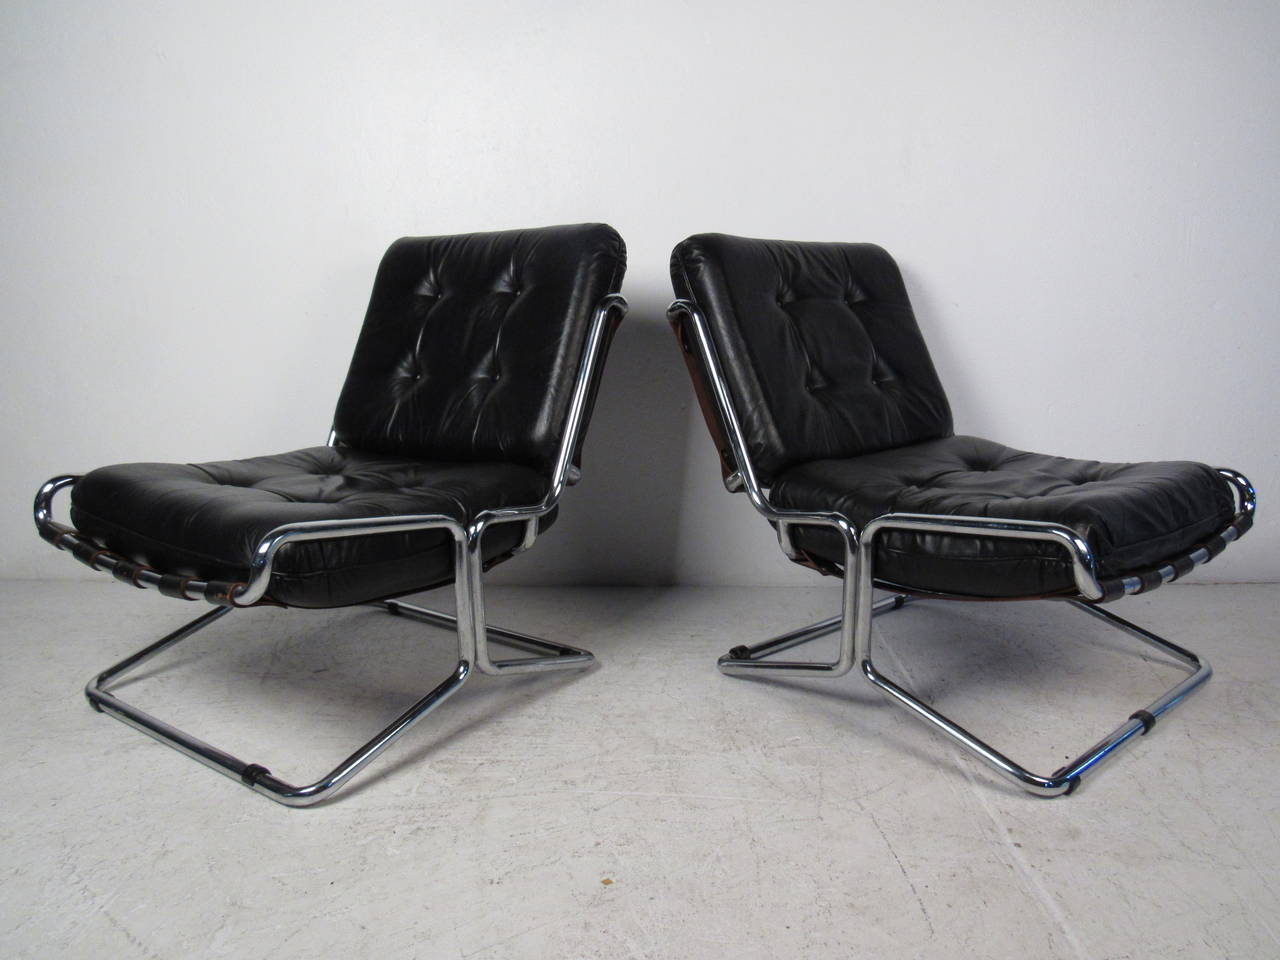 This pair of midcentury Italian lounge chairs features a chrome base, leather strap supports, and comfortable leather upholstery which offers a modern flare and comfortable seating to any home or office space.

Please confirm item location (NY or